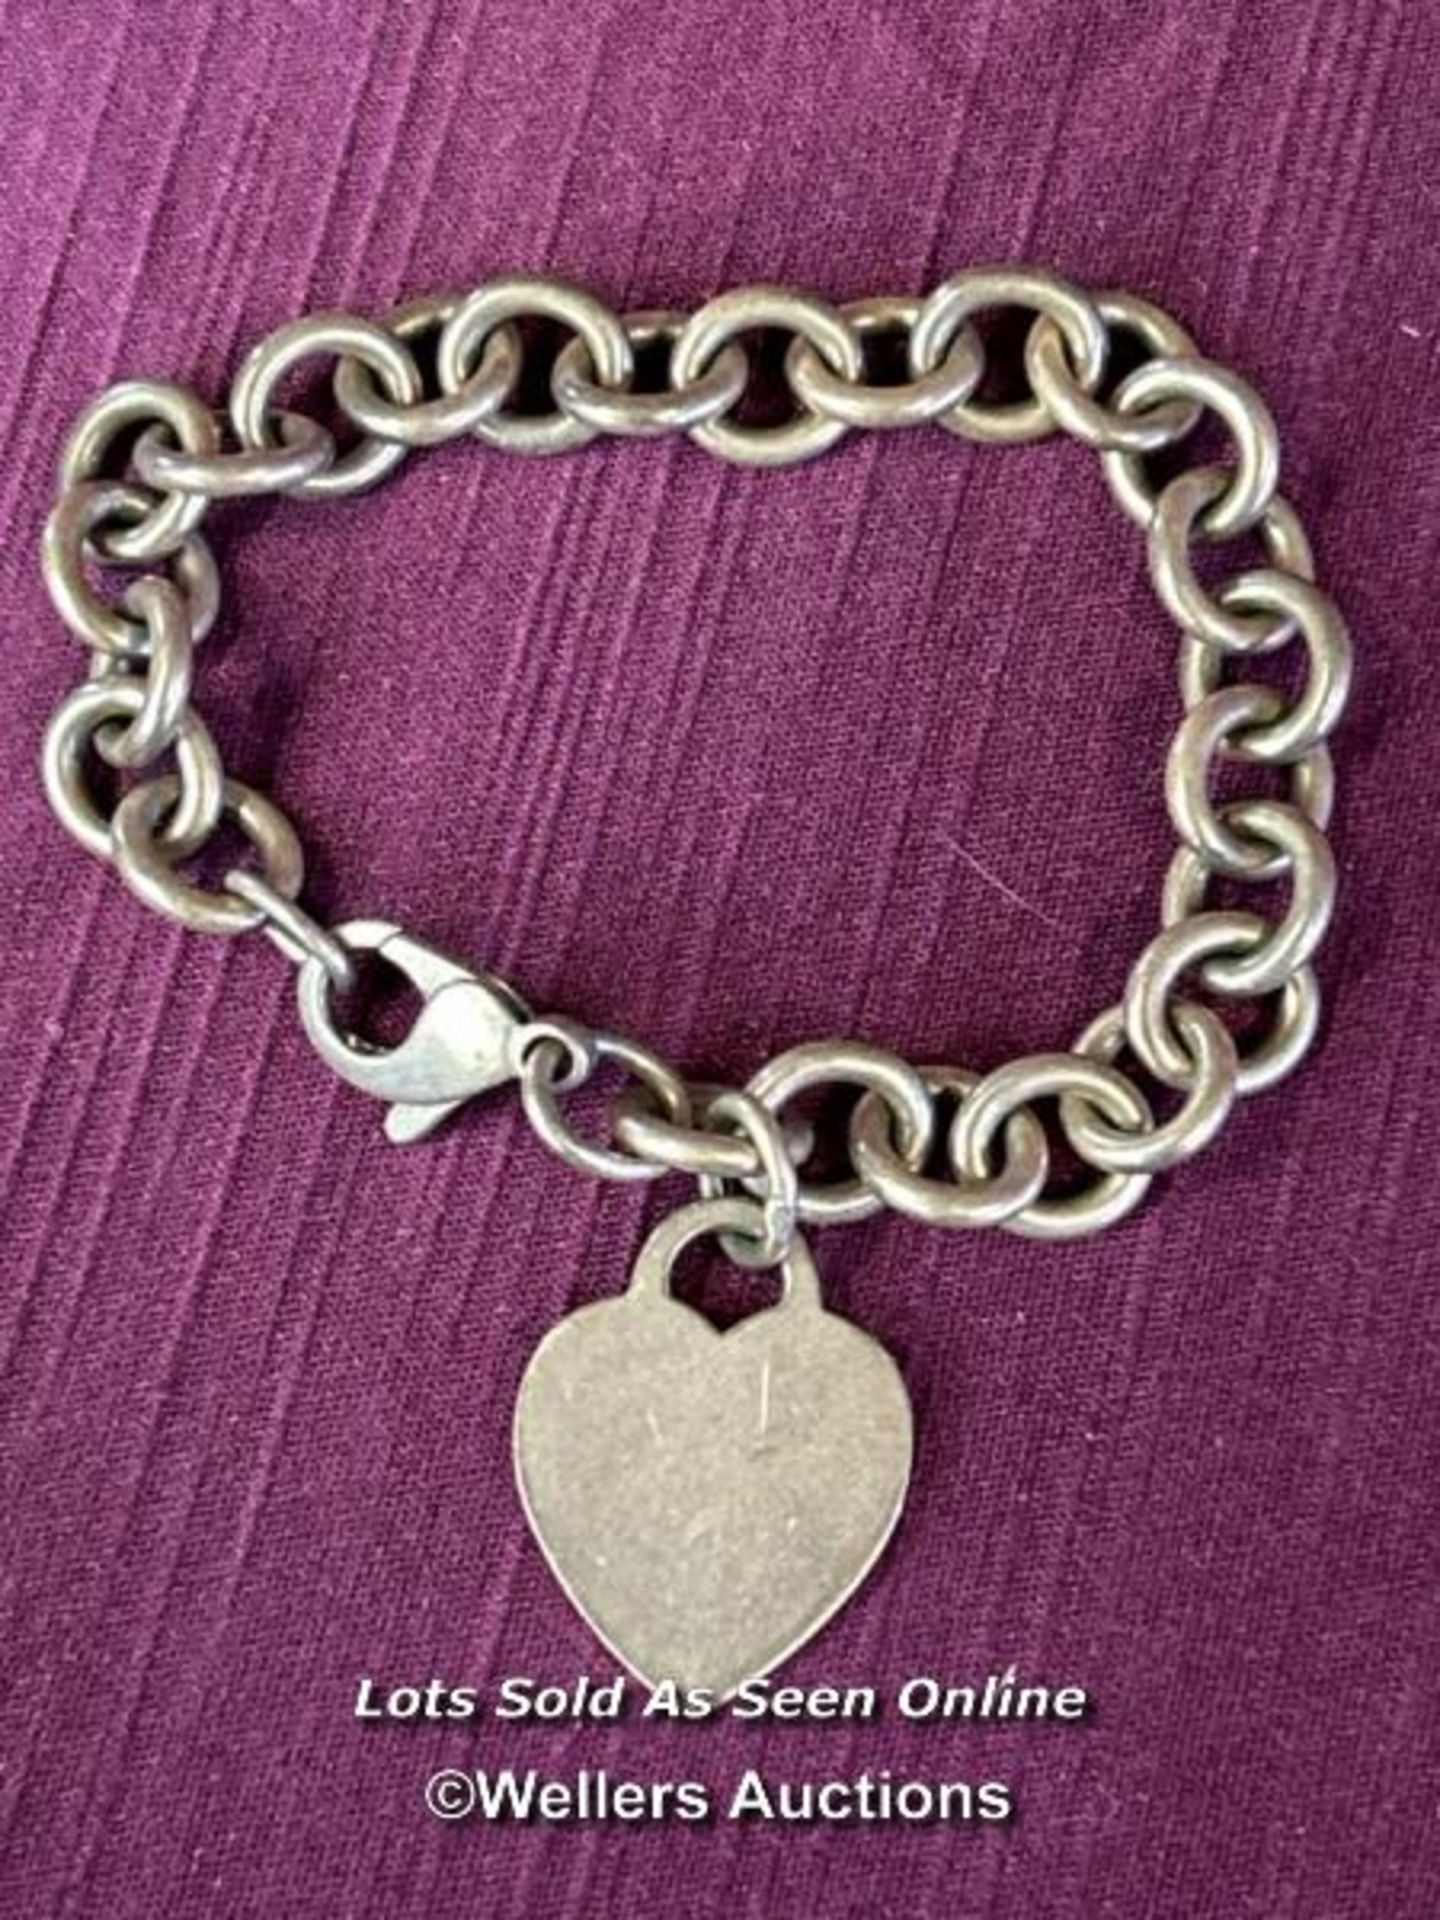 TIFFANY & CO. LINKED CHAIN BRACELET WITH HEART CHARM, MARKED 925 SILVER, WEIGHT 34GMS - Image 2 of 2